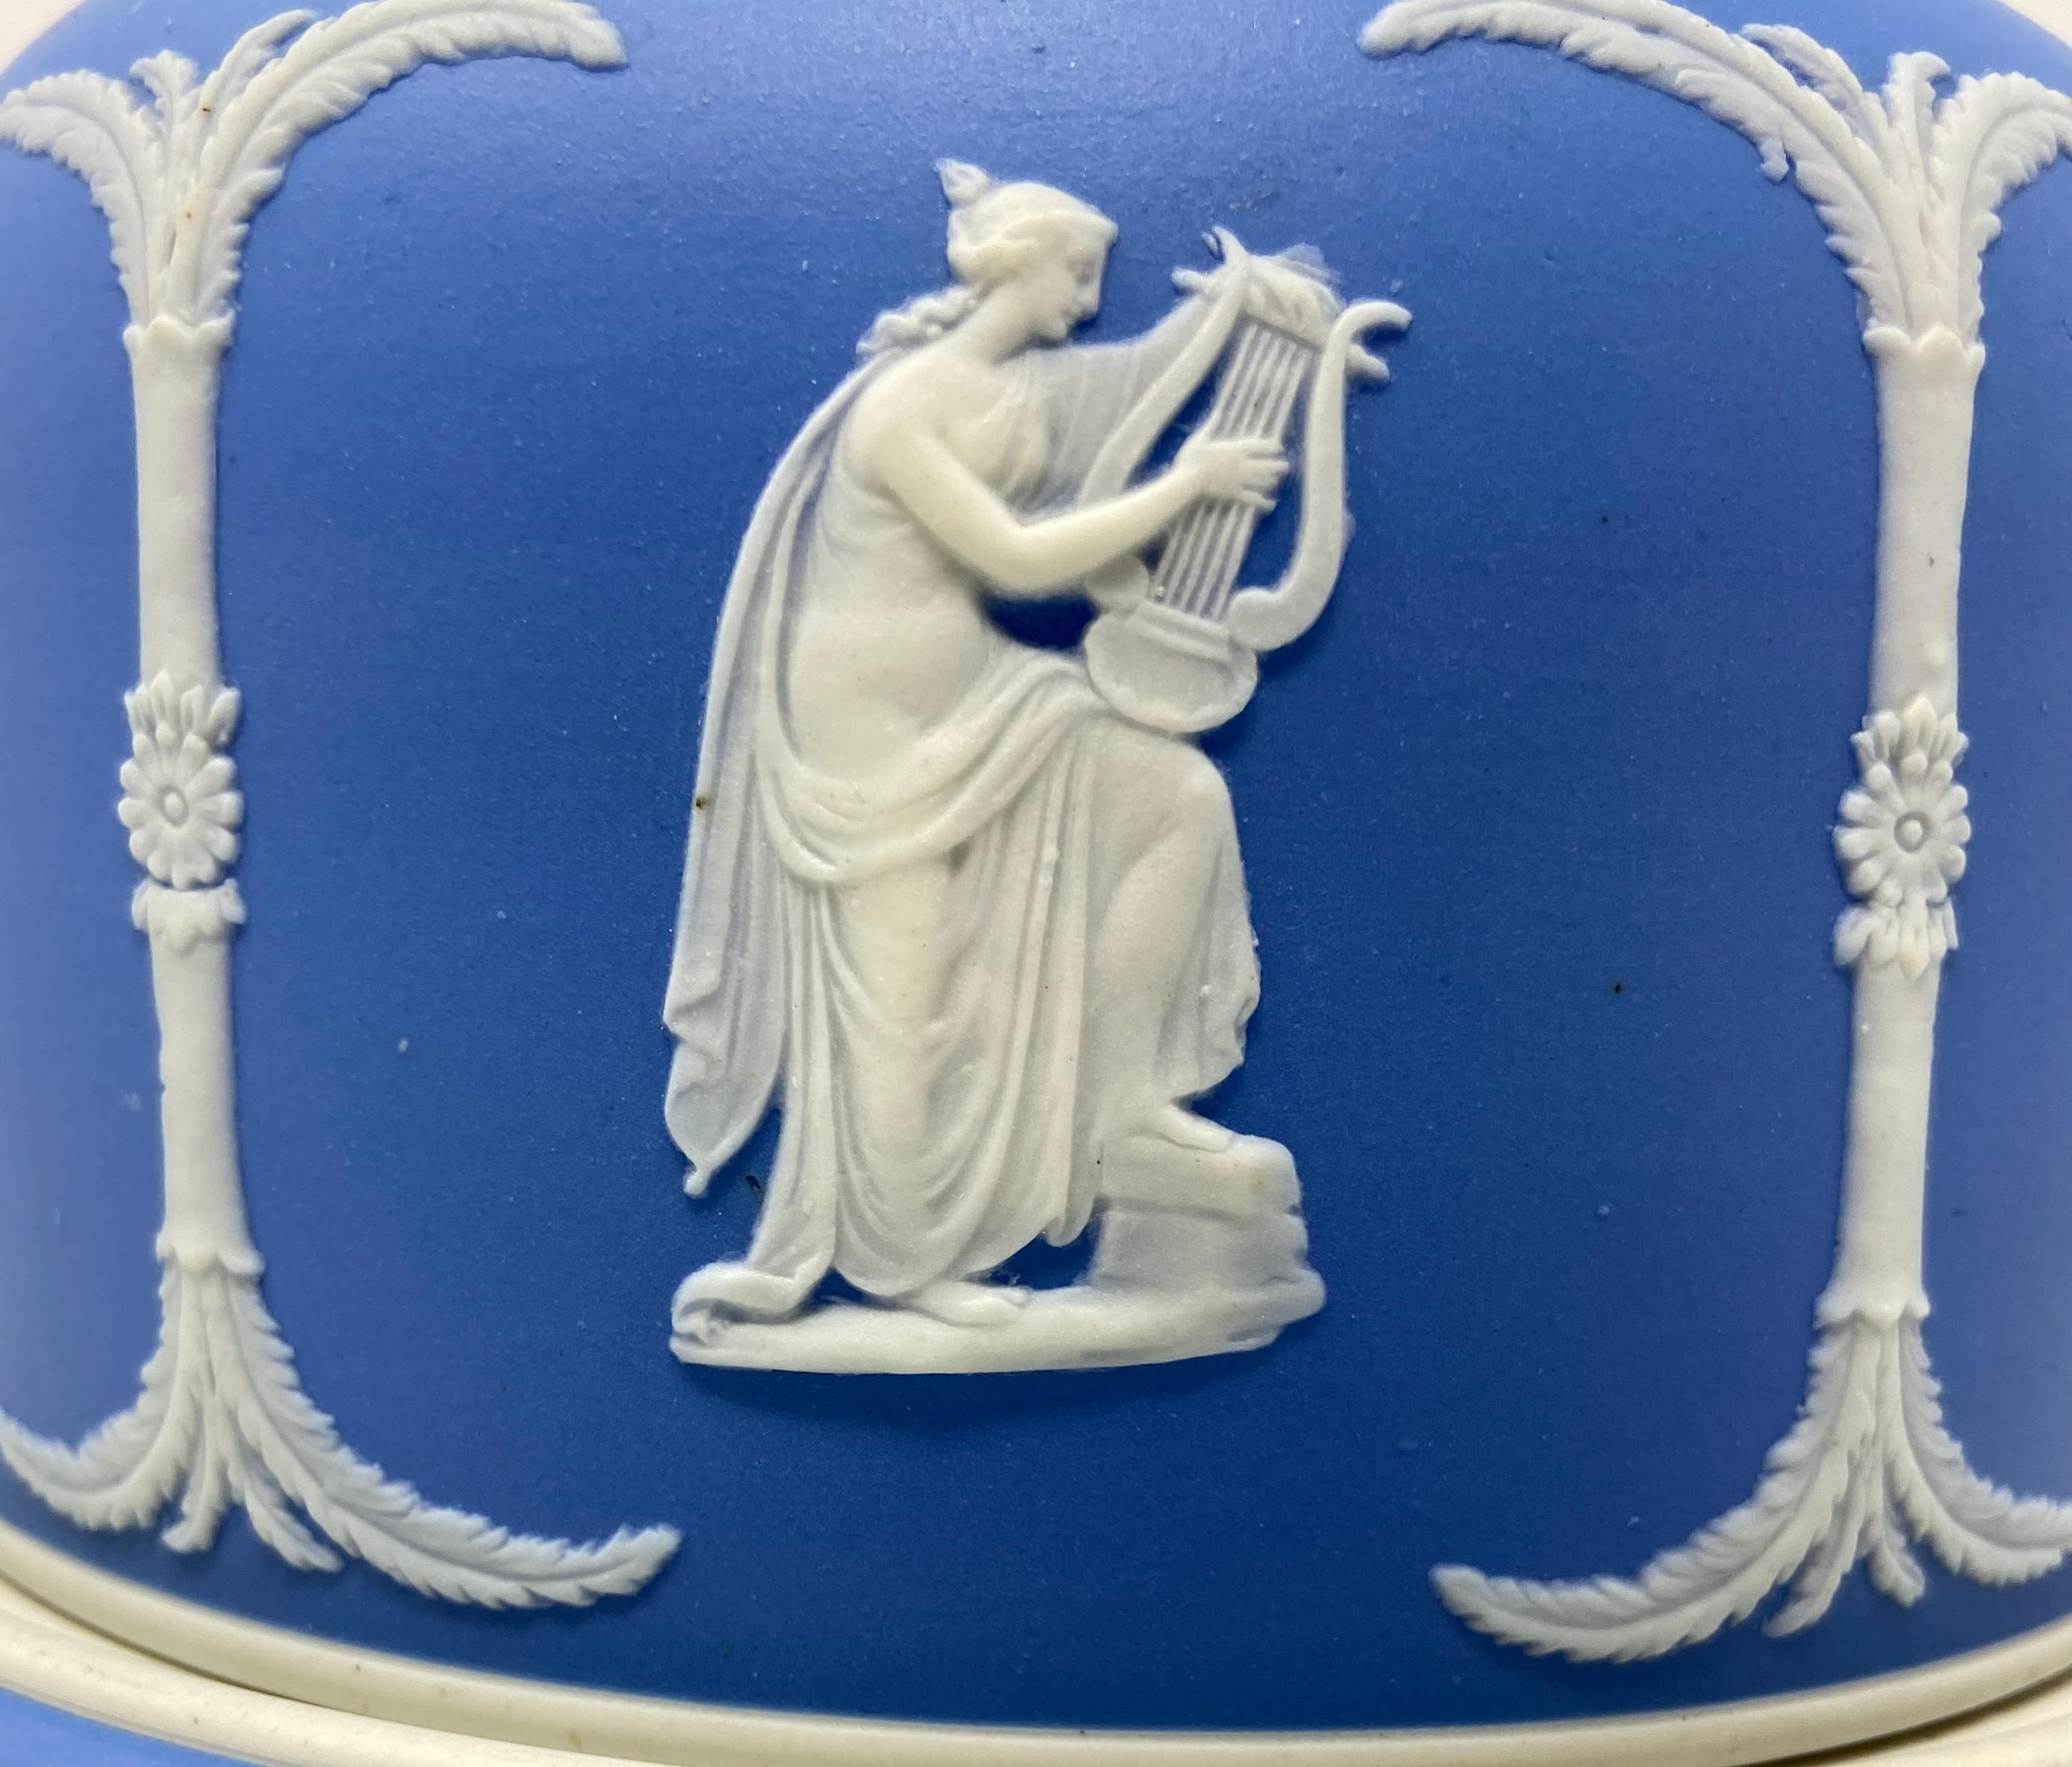 Antique English Wedgwood Blue & White Porcelain Cheese Dish and Cover Circa 1900 7